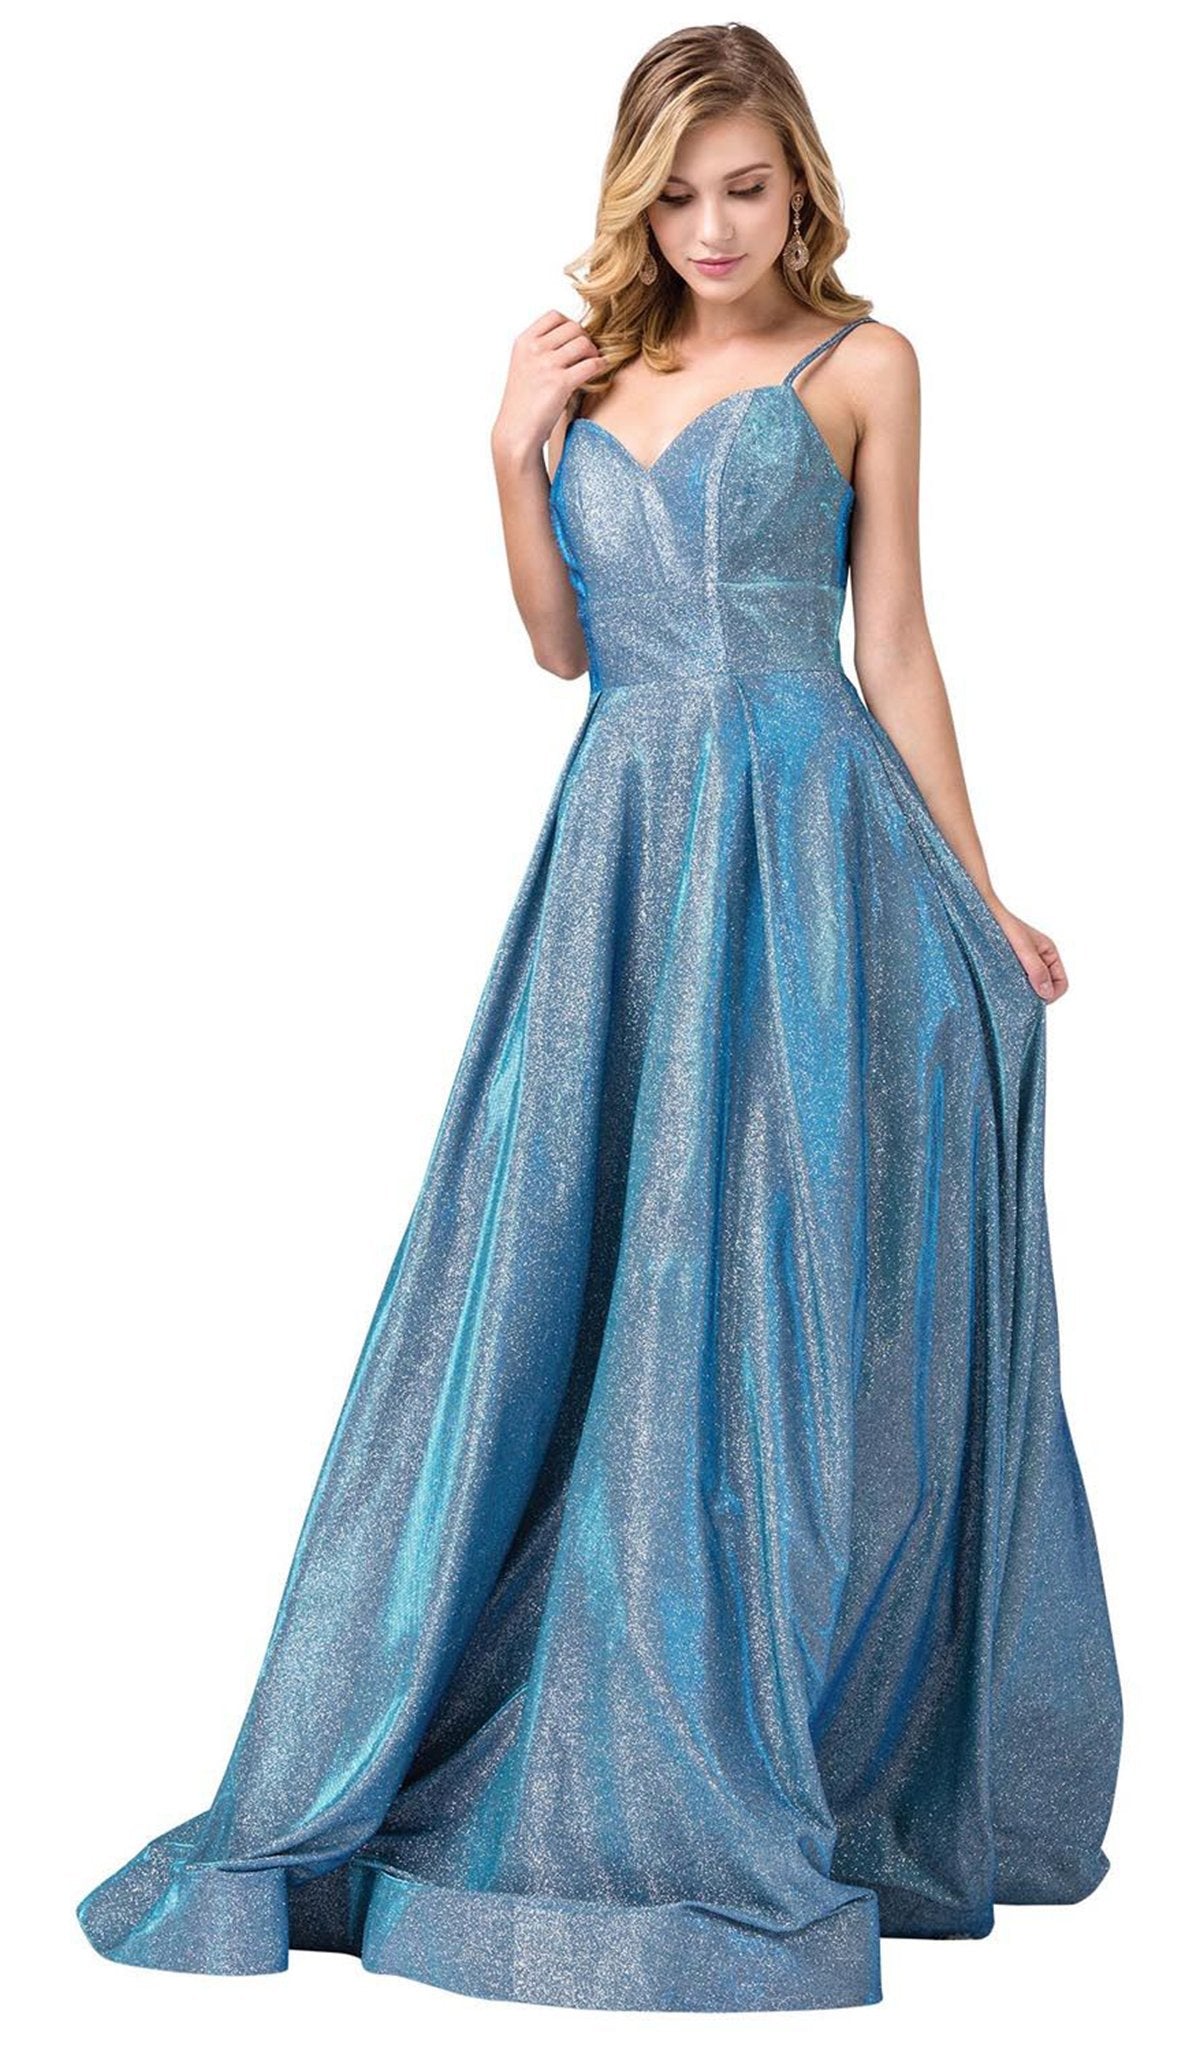 Dancing Queen - 2611 Sweetheart Lace Up Back Metallic Jersey Gown In Blue